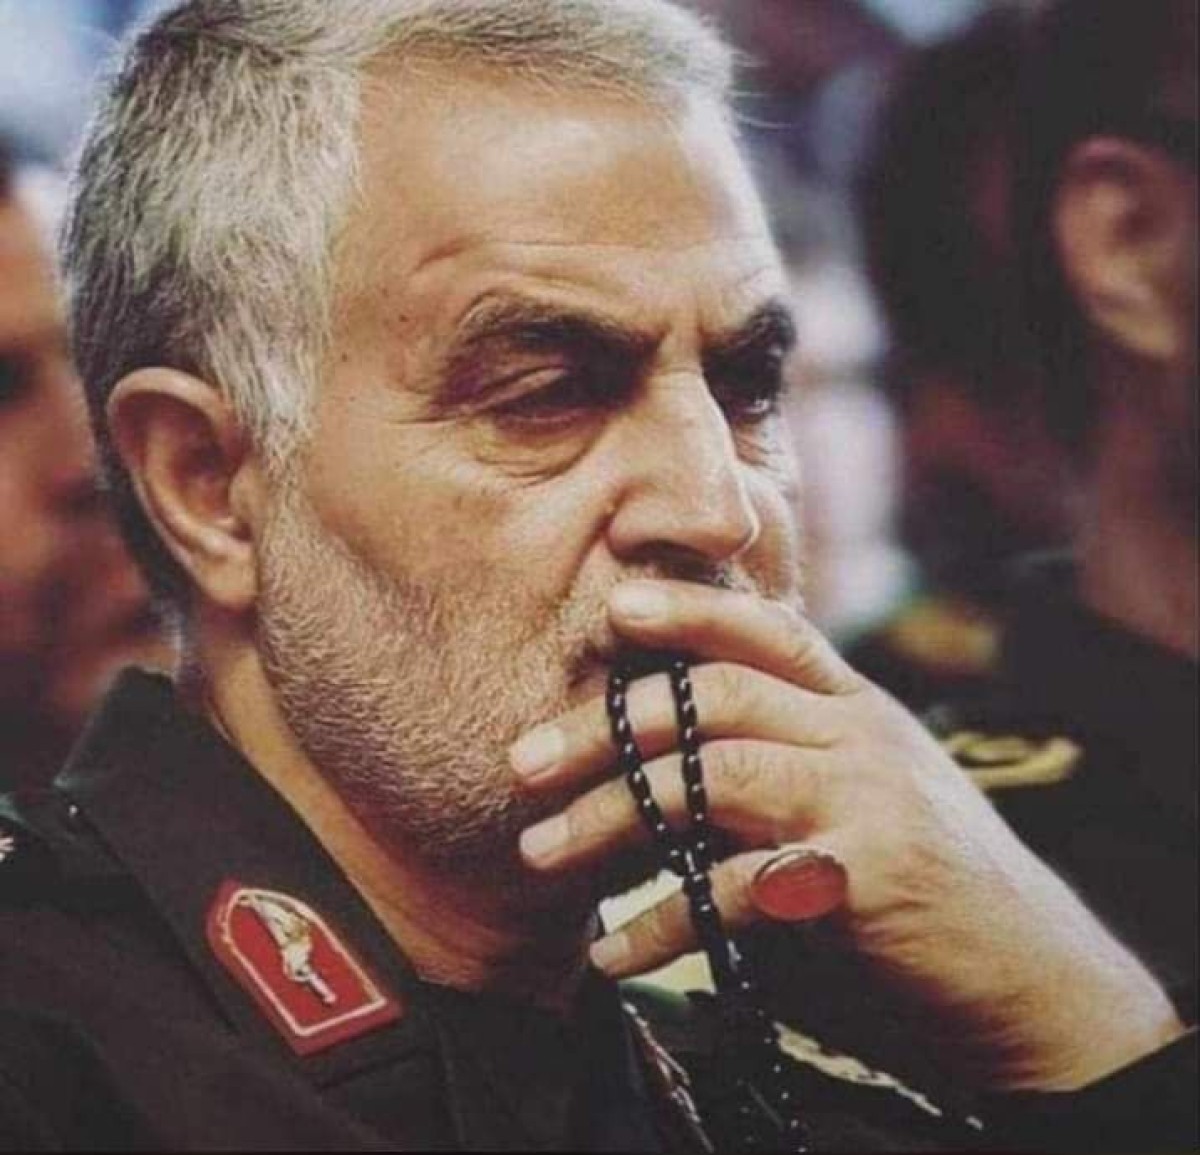  The Importance of Palestinian Unity from the Perspective of Sardar Qasem Soleimani